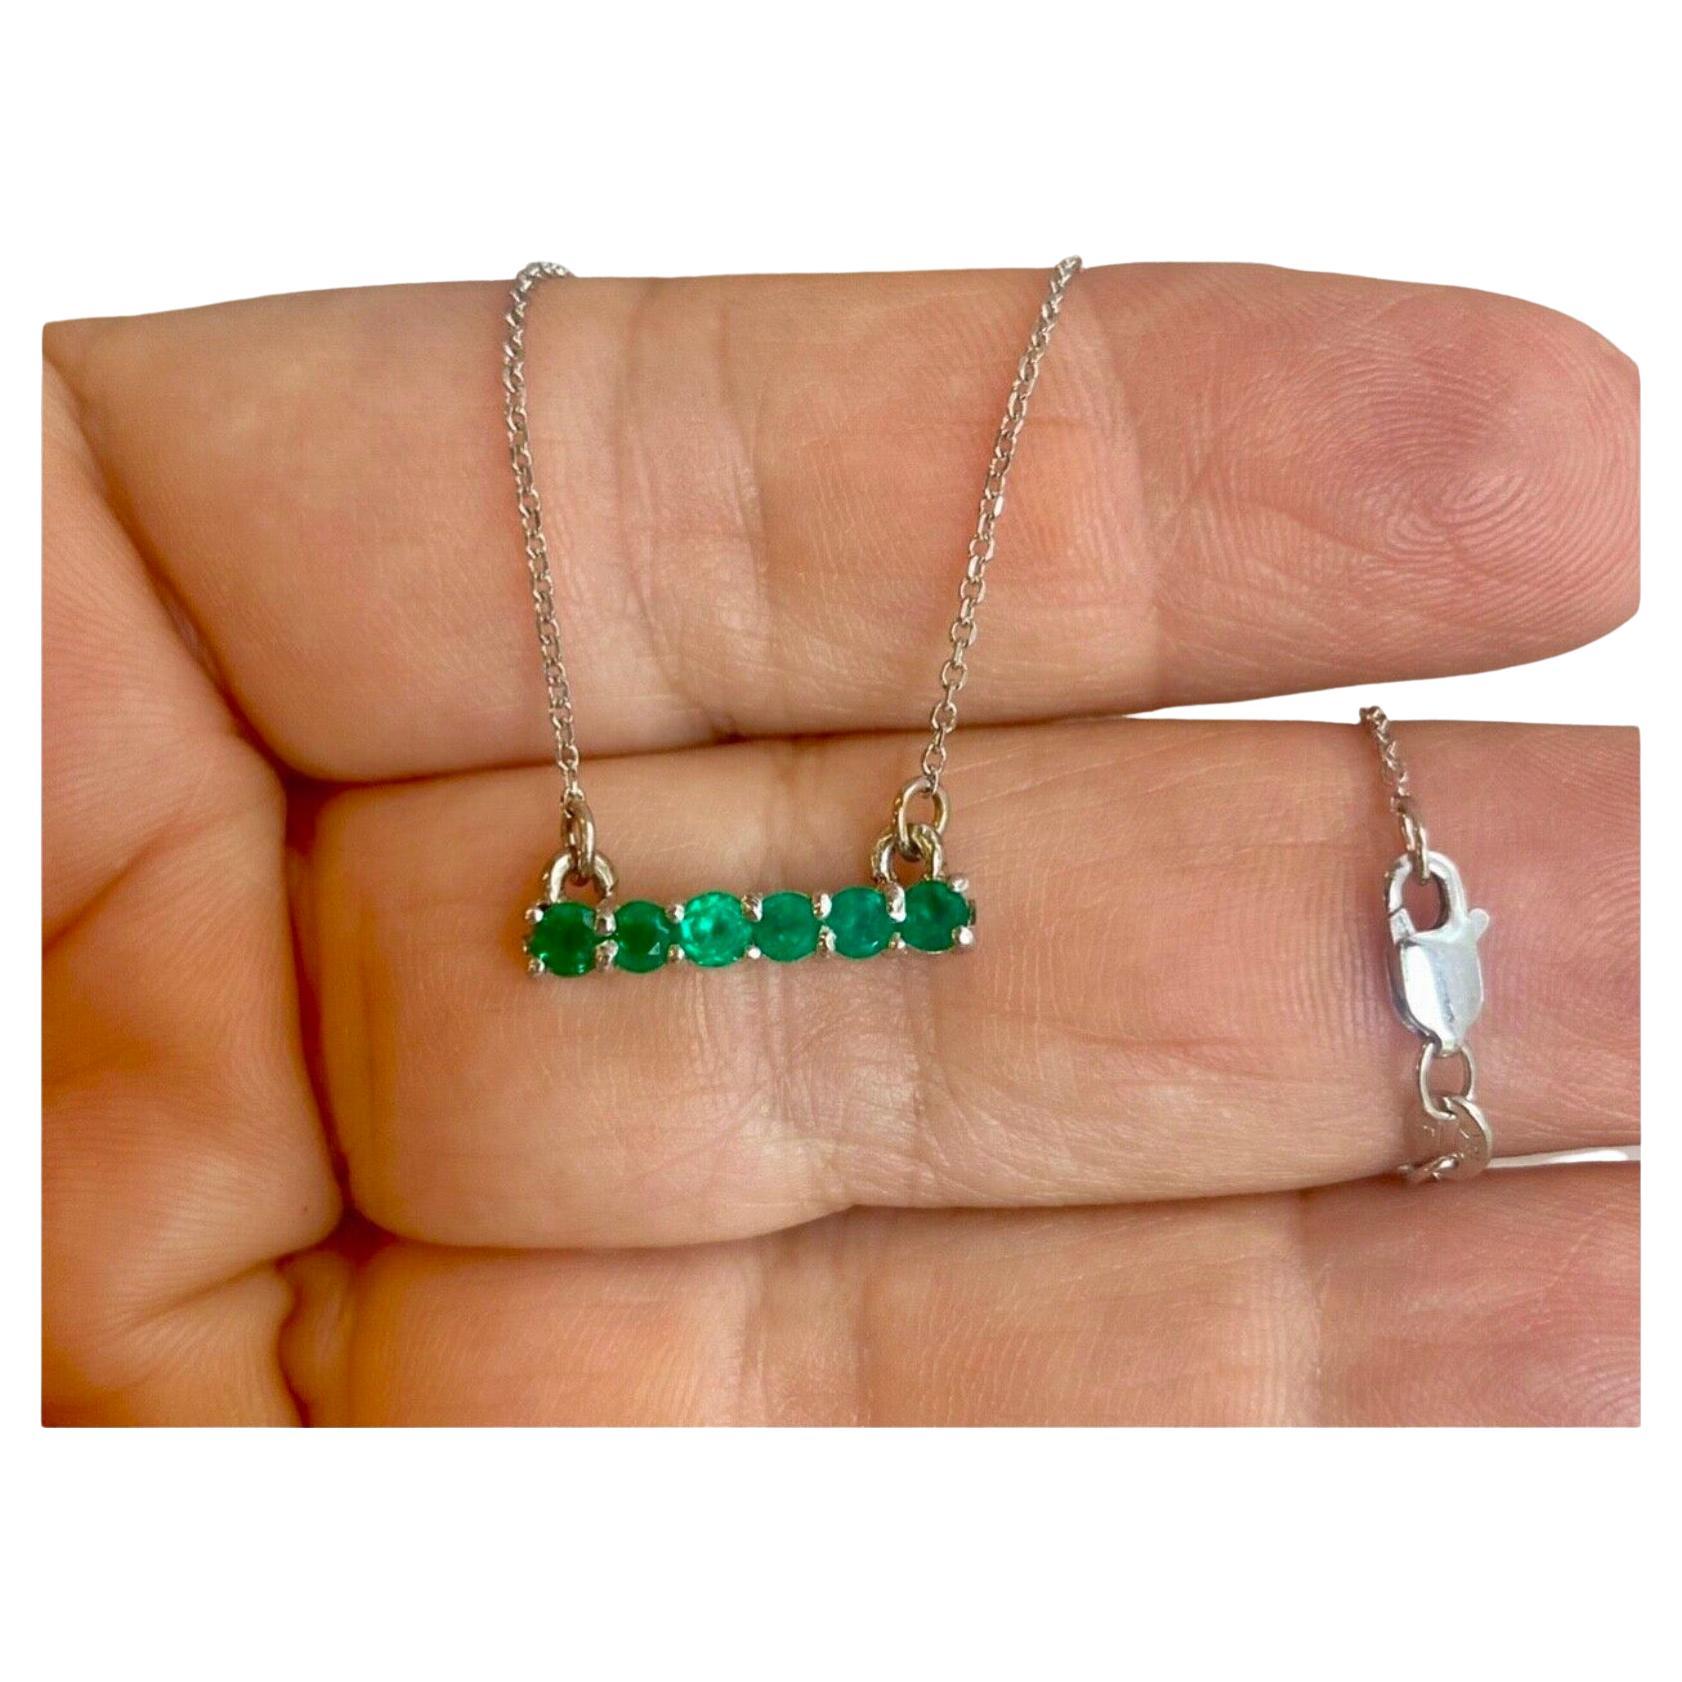 1.00 Carat Colombian Emerald Bar Necklace in 18K White Gold